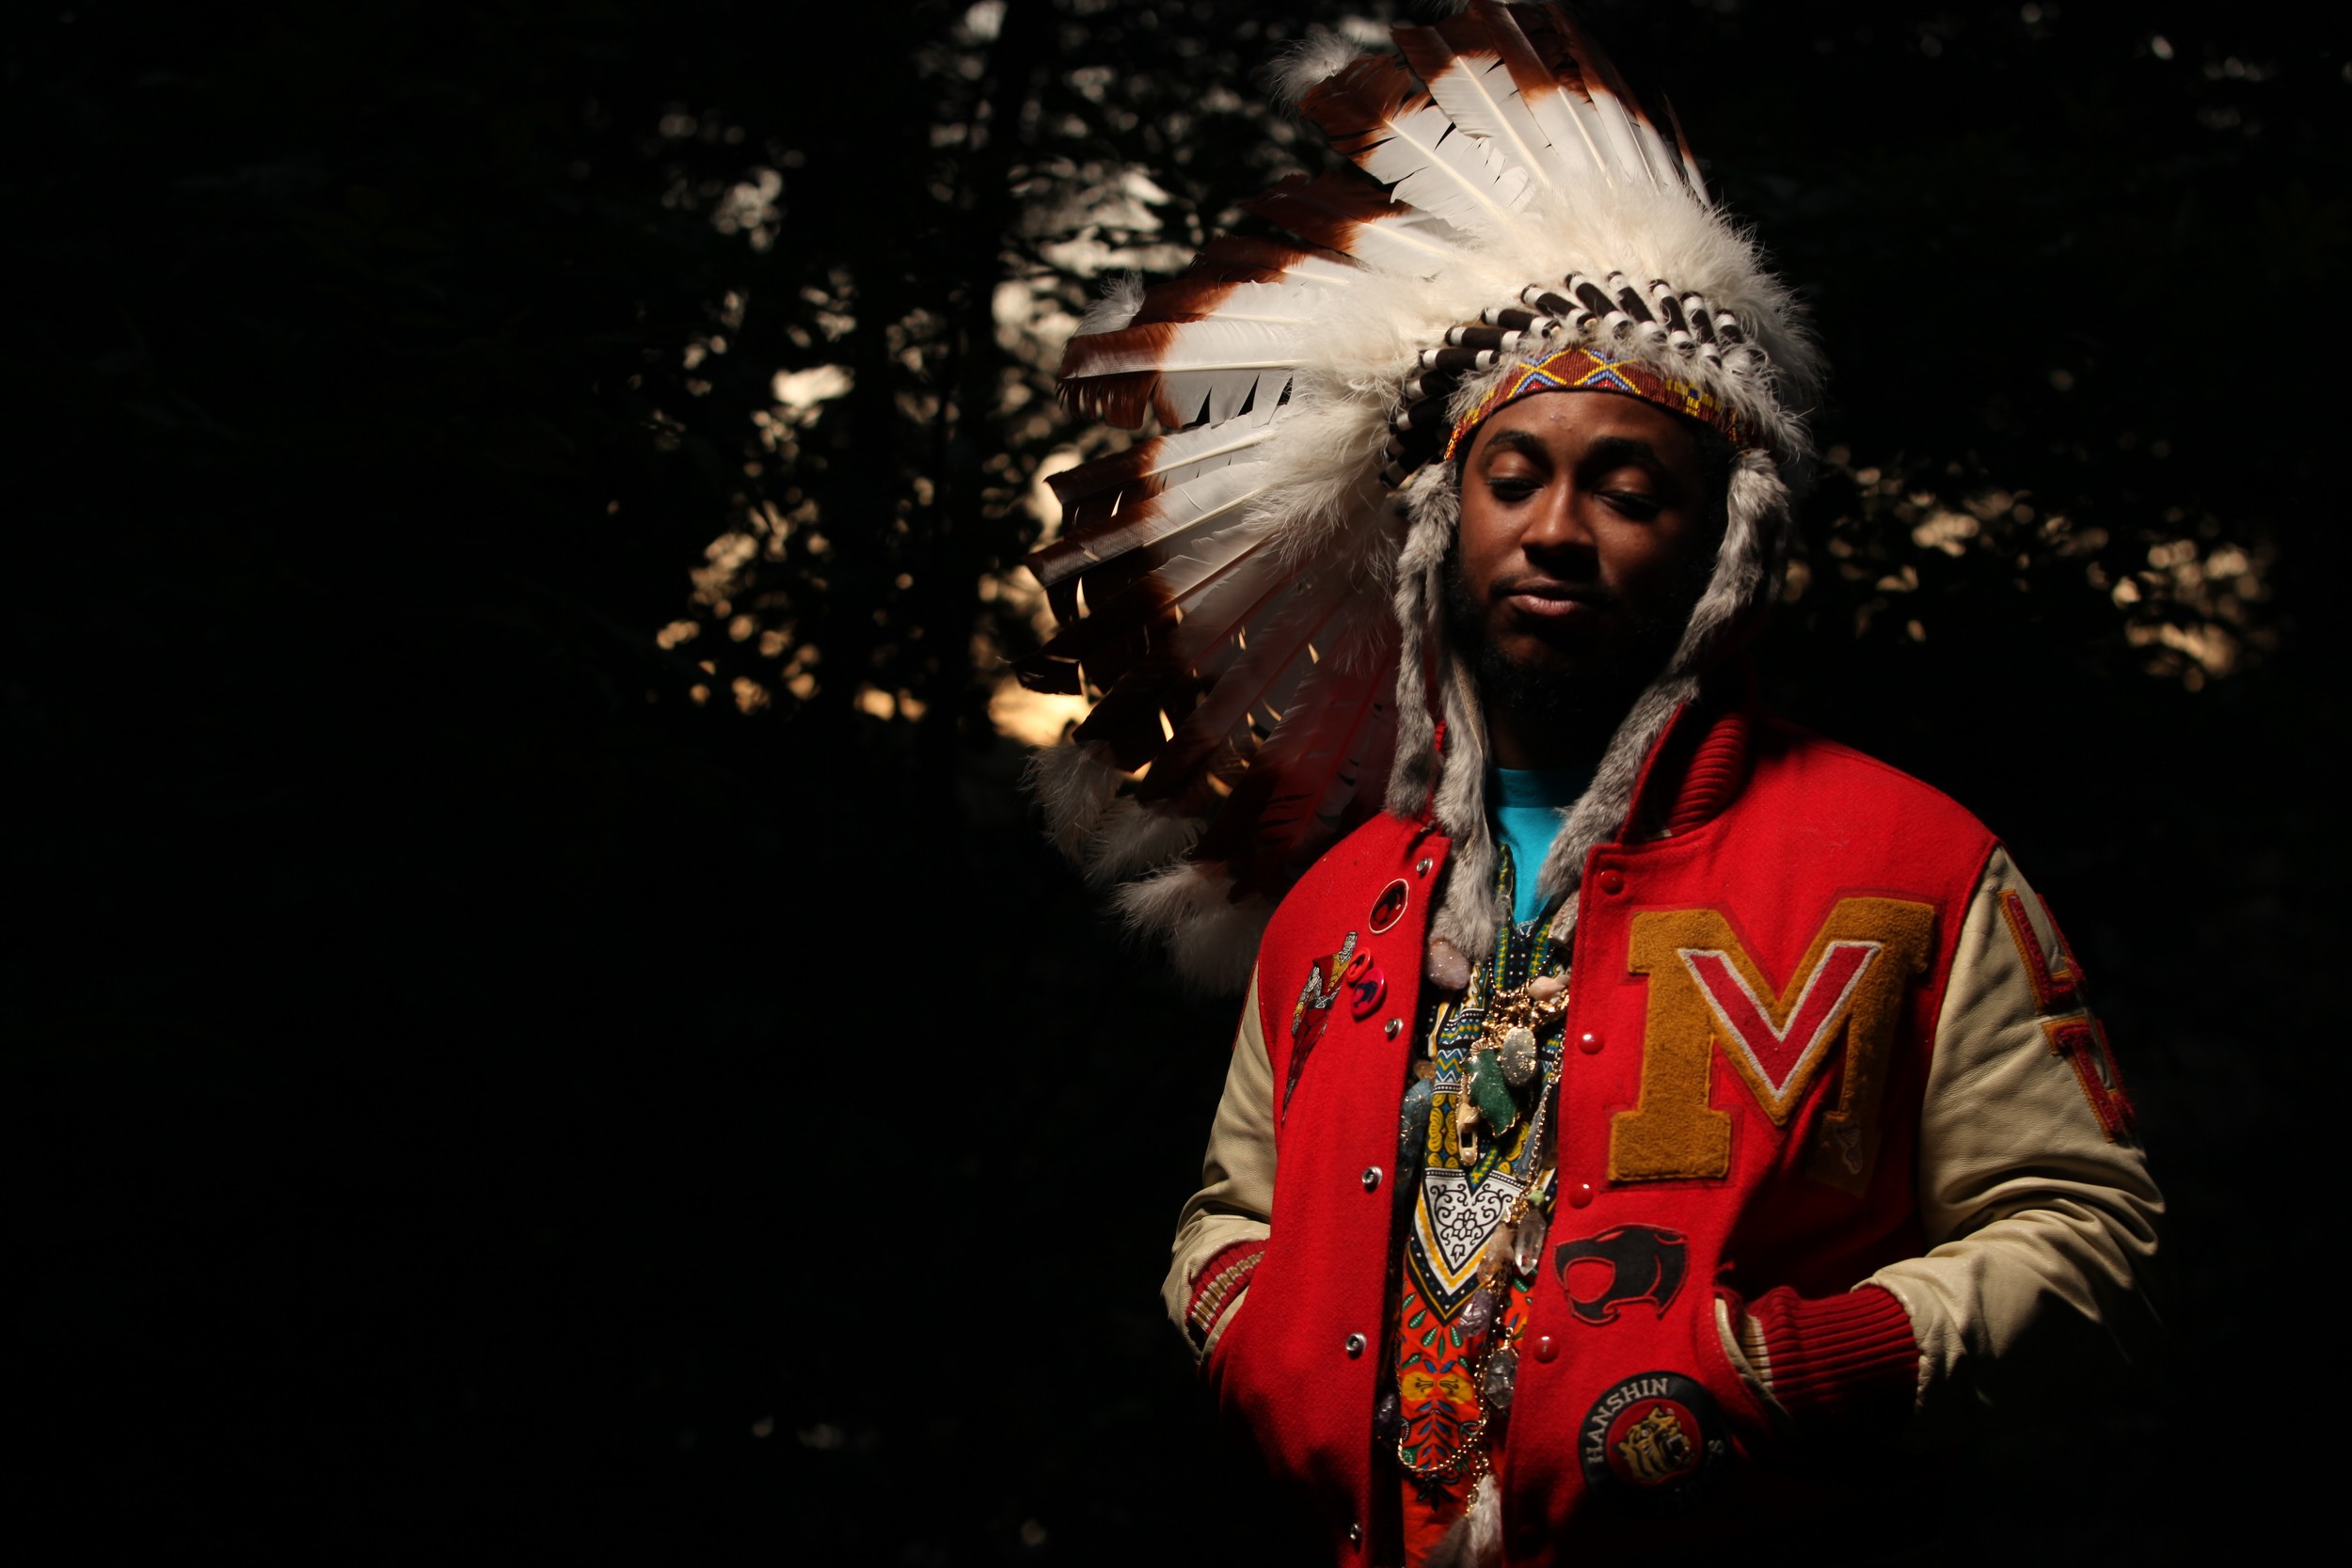 Thundercat celebrates his friend Mac Miller in powerful show at